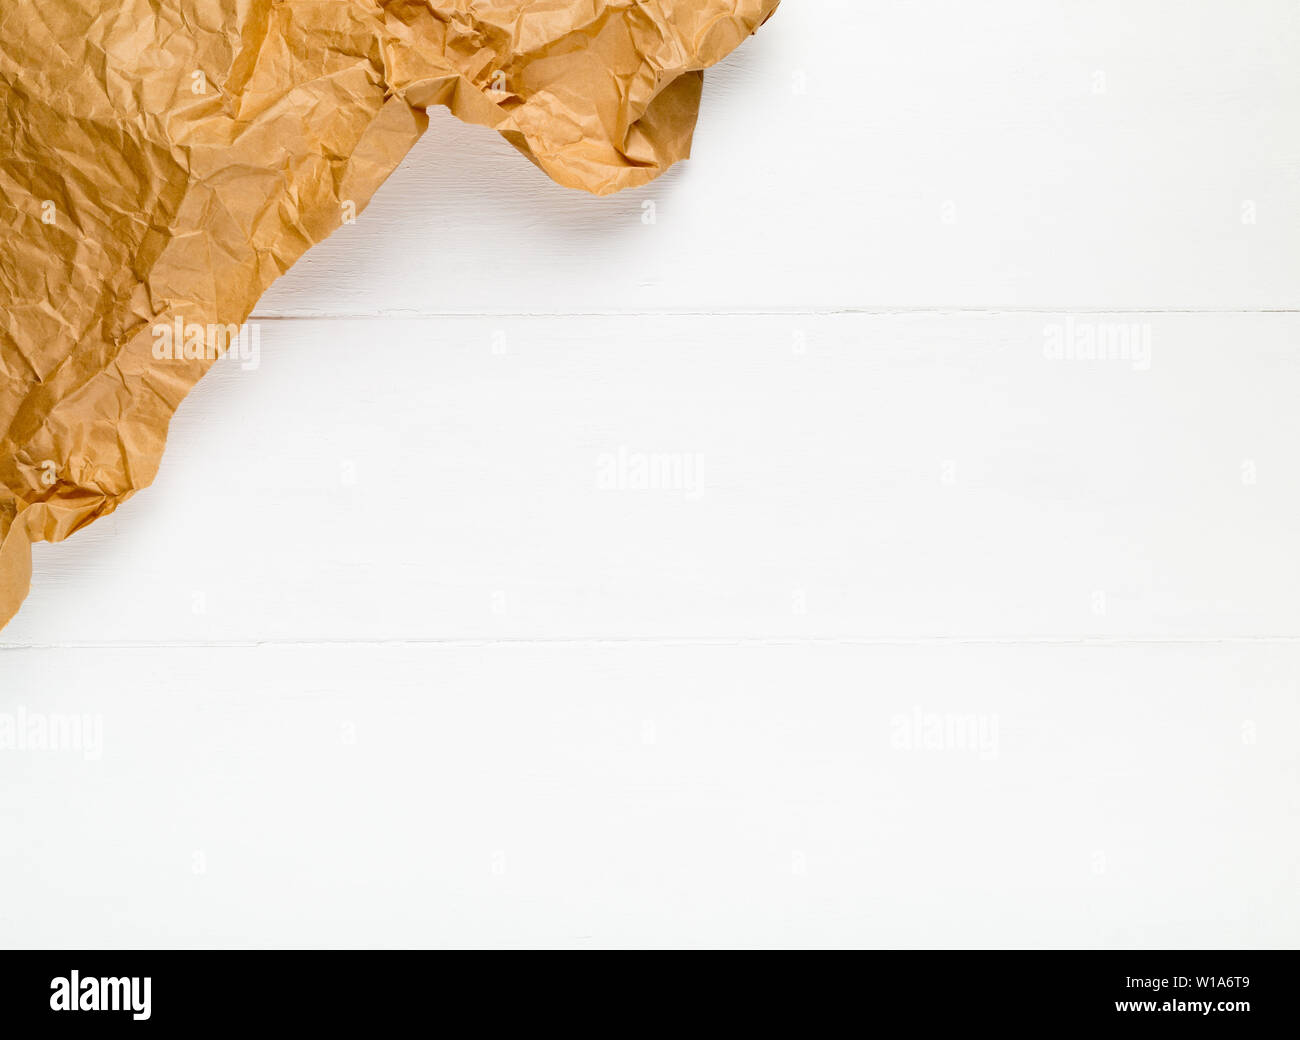 Crumbled brown packing paper on white wooden kitchen table with copy space Stock Photo